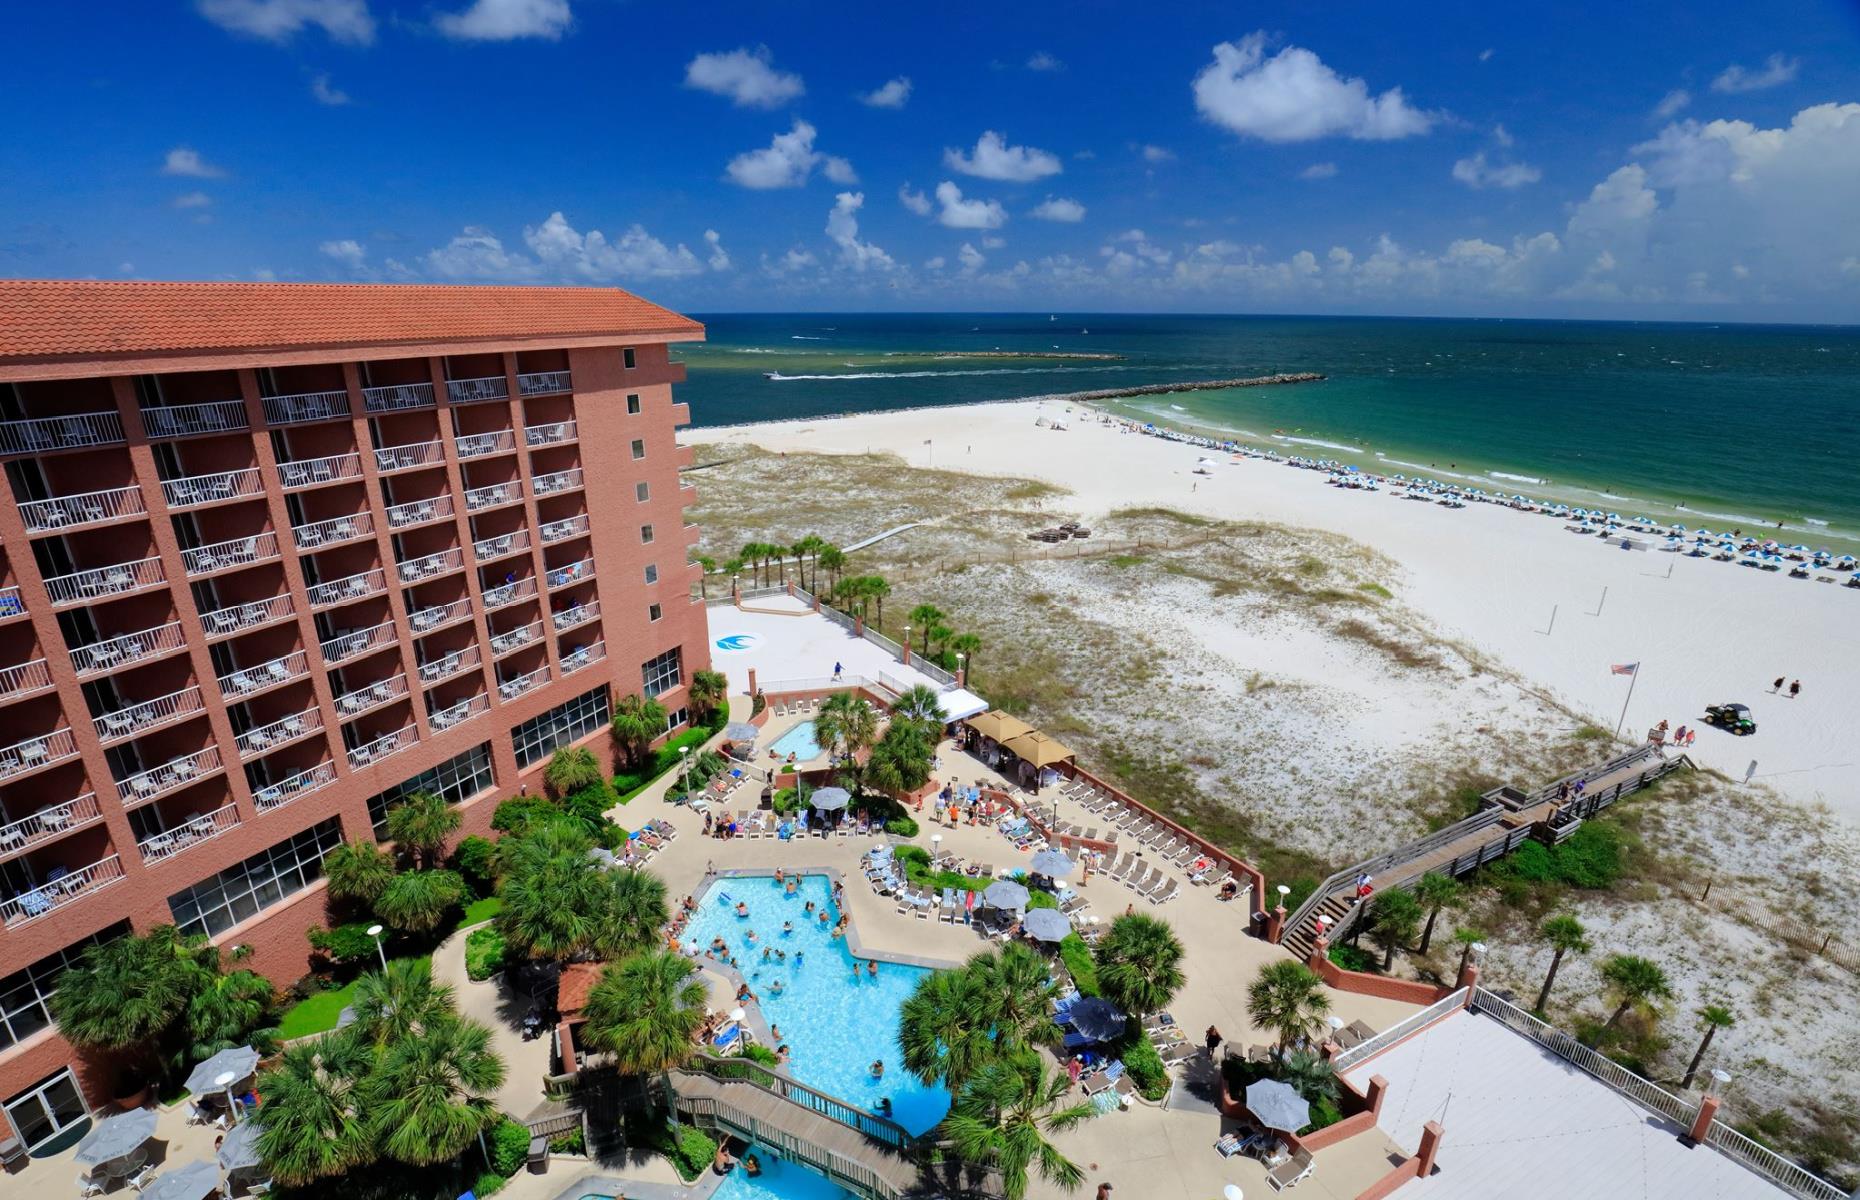 <p>Alabama can only claim a small slice of the Gulf Coast, but the area around Orange Beach and Gulf Shores boasts unexpectedly beautiful white sand beaches. The area is full of tall hotels with suite-style rooms that can accommodate both large and small groups, including <a href="https://www.perdidobeachresort.com">this well-appointed resort</a> right on sandy Orange Beach. In addition to close proximity to the beach, the resort has five dining options, indoor and outdoor pools, and opportunities for watersports and sailing tours.</p>